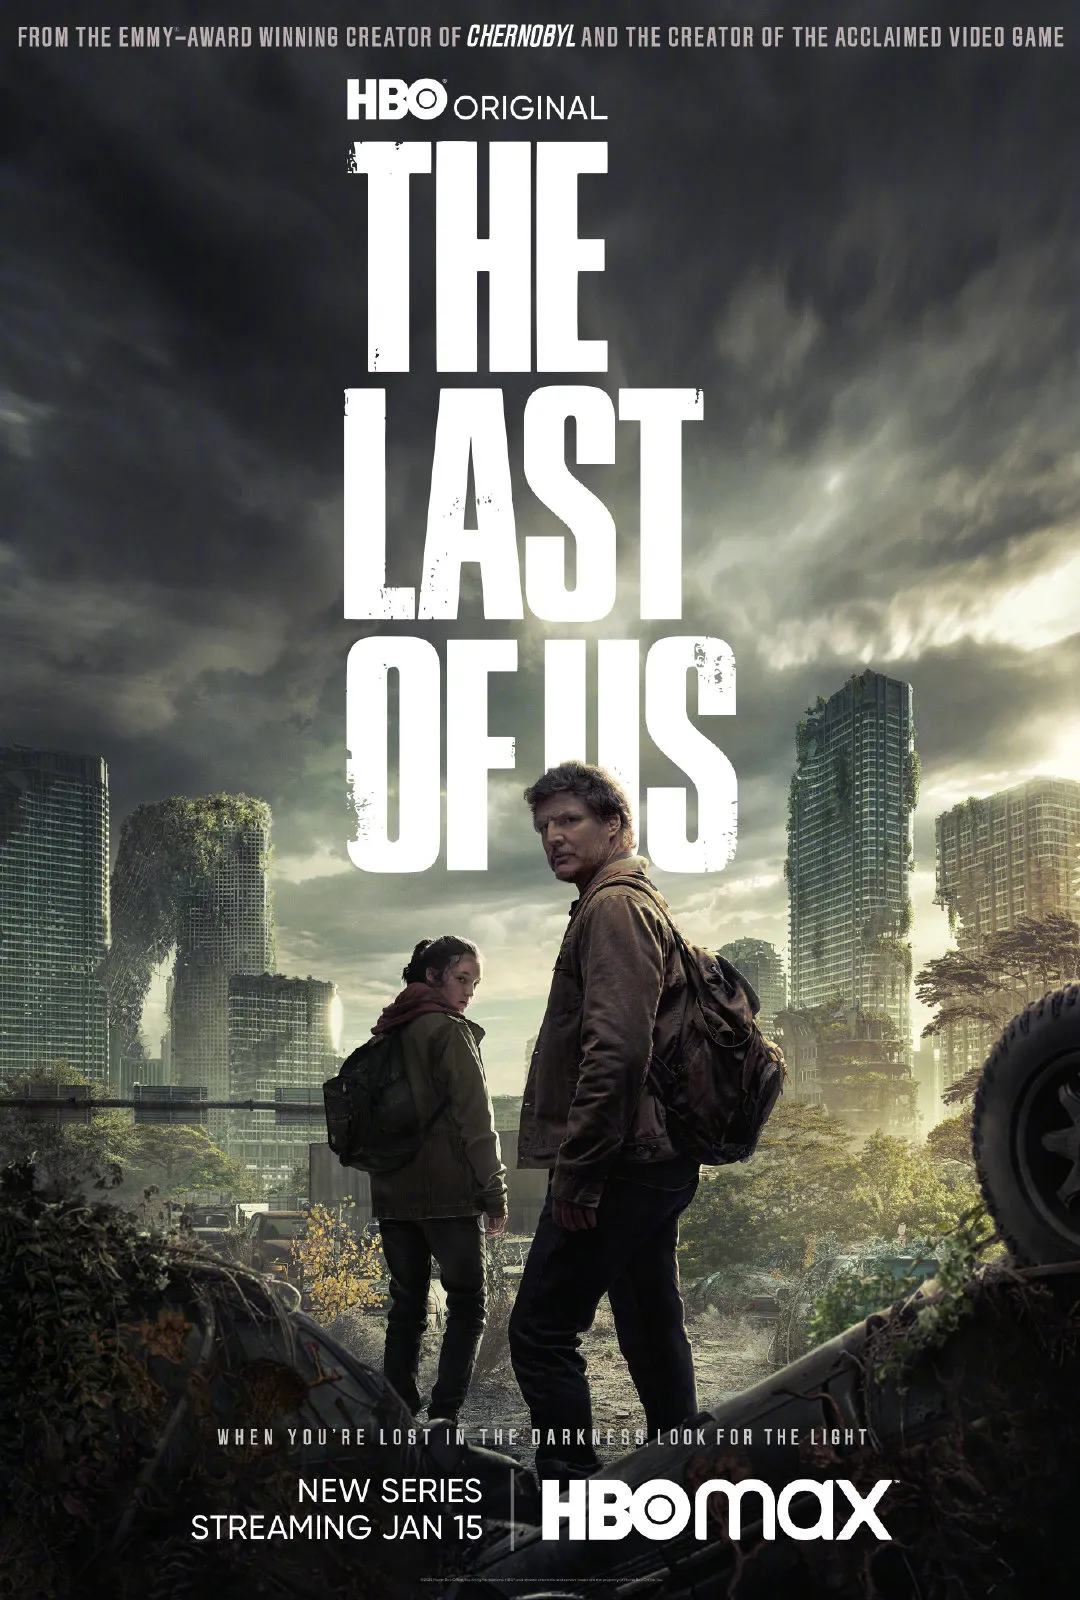 HBO's TV series 'The Last of Us' released poster, Joel and Ellie embark on an adventure | FMV6